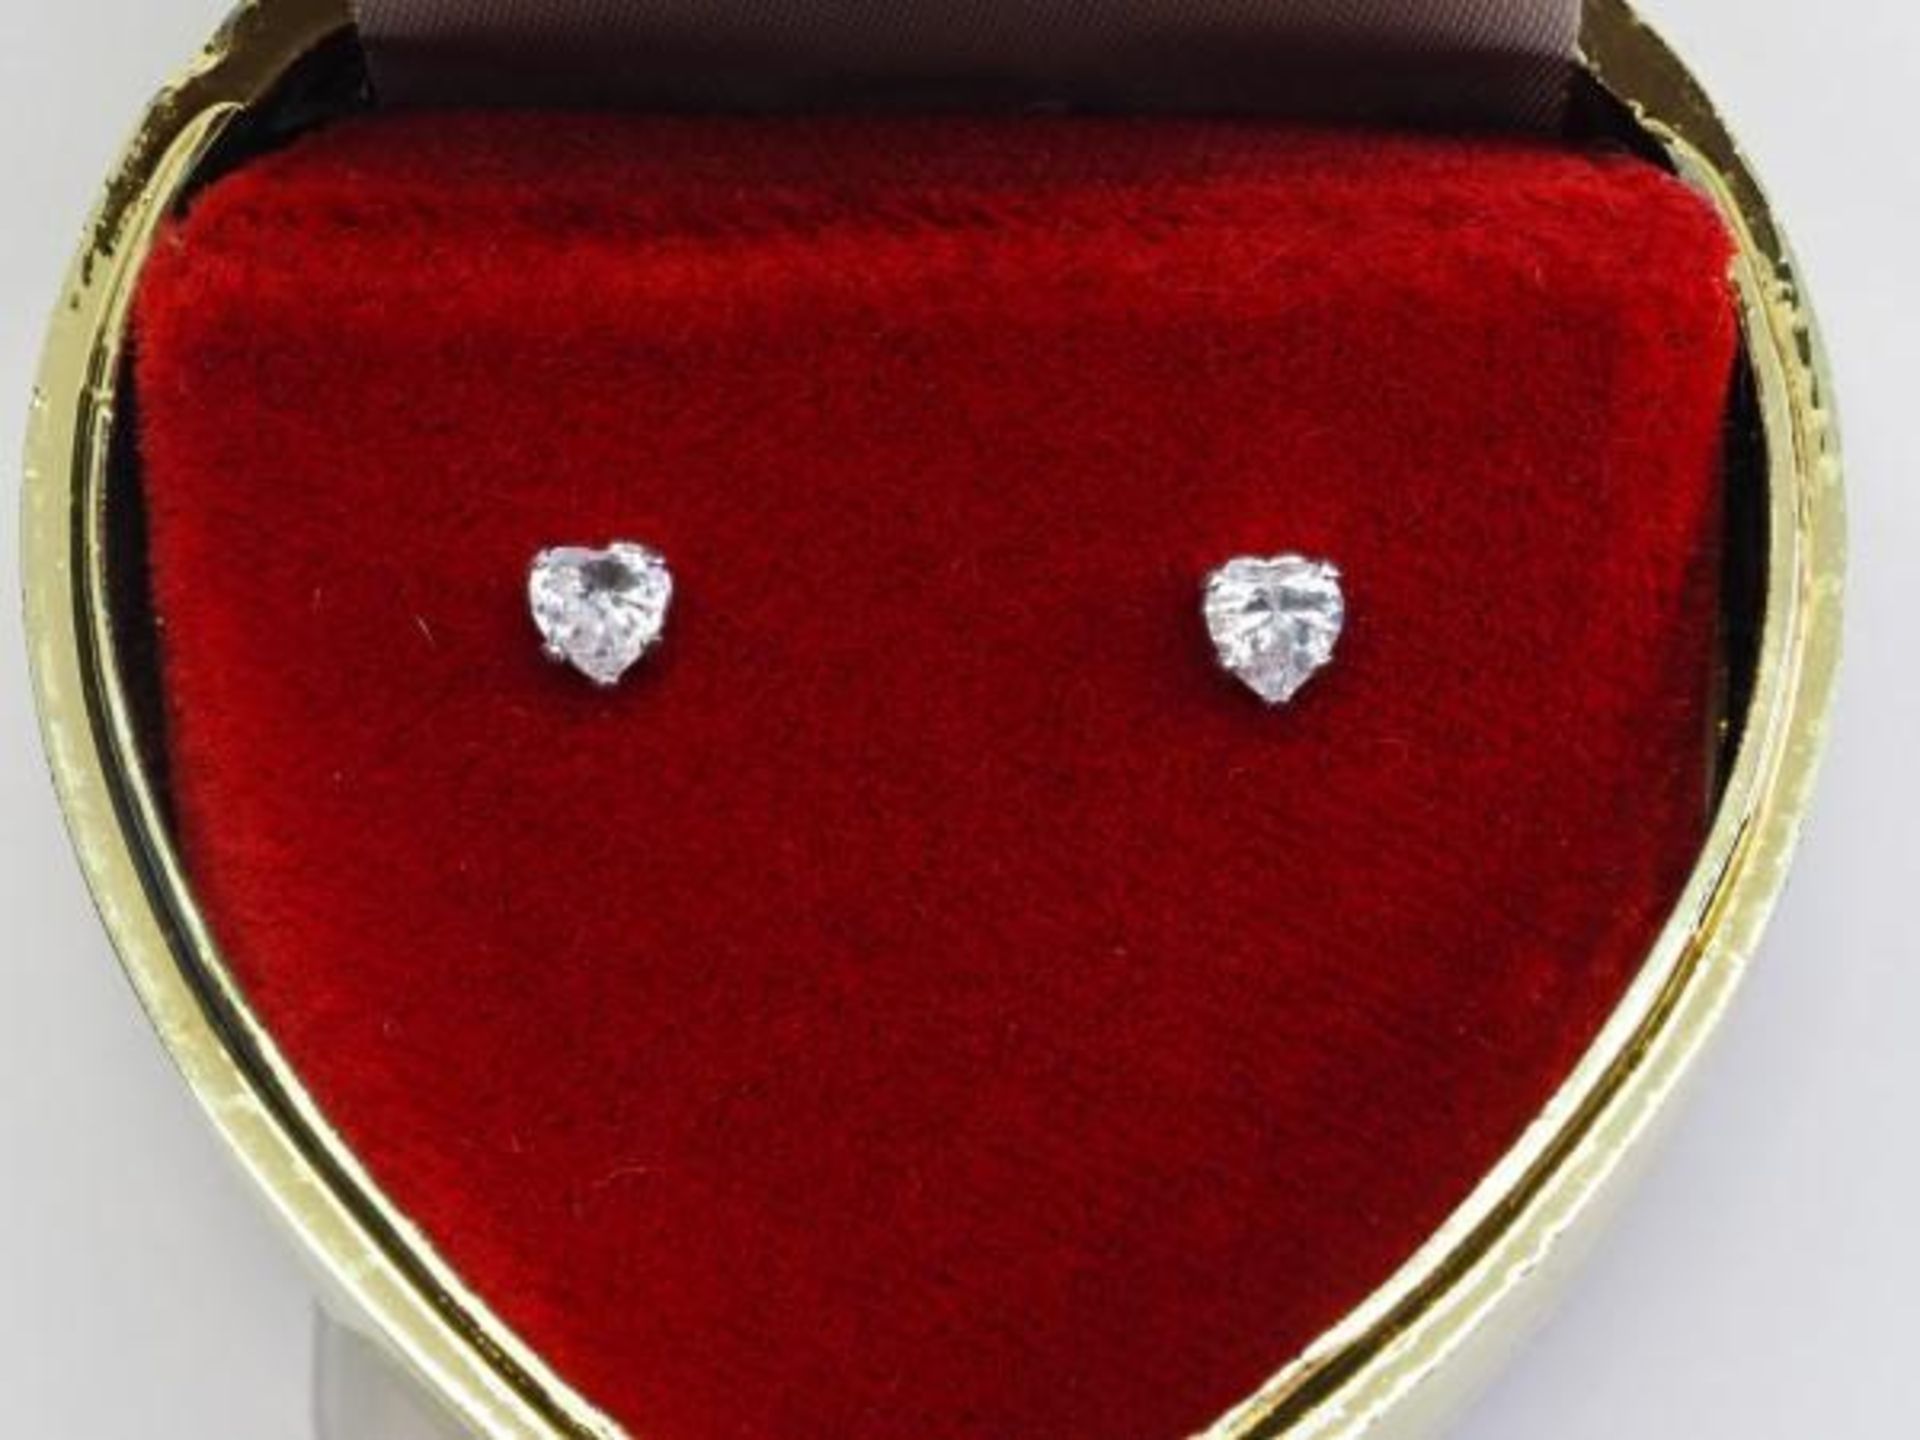 10 kt. Gold Set Earrings with Heart Shaped CZ. Retail $200 (MS07 - 23) - Image 2 of 2